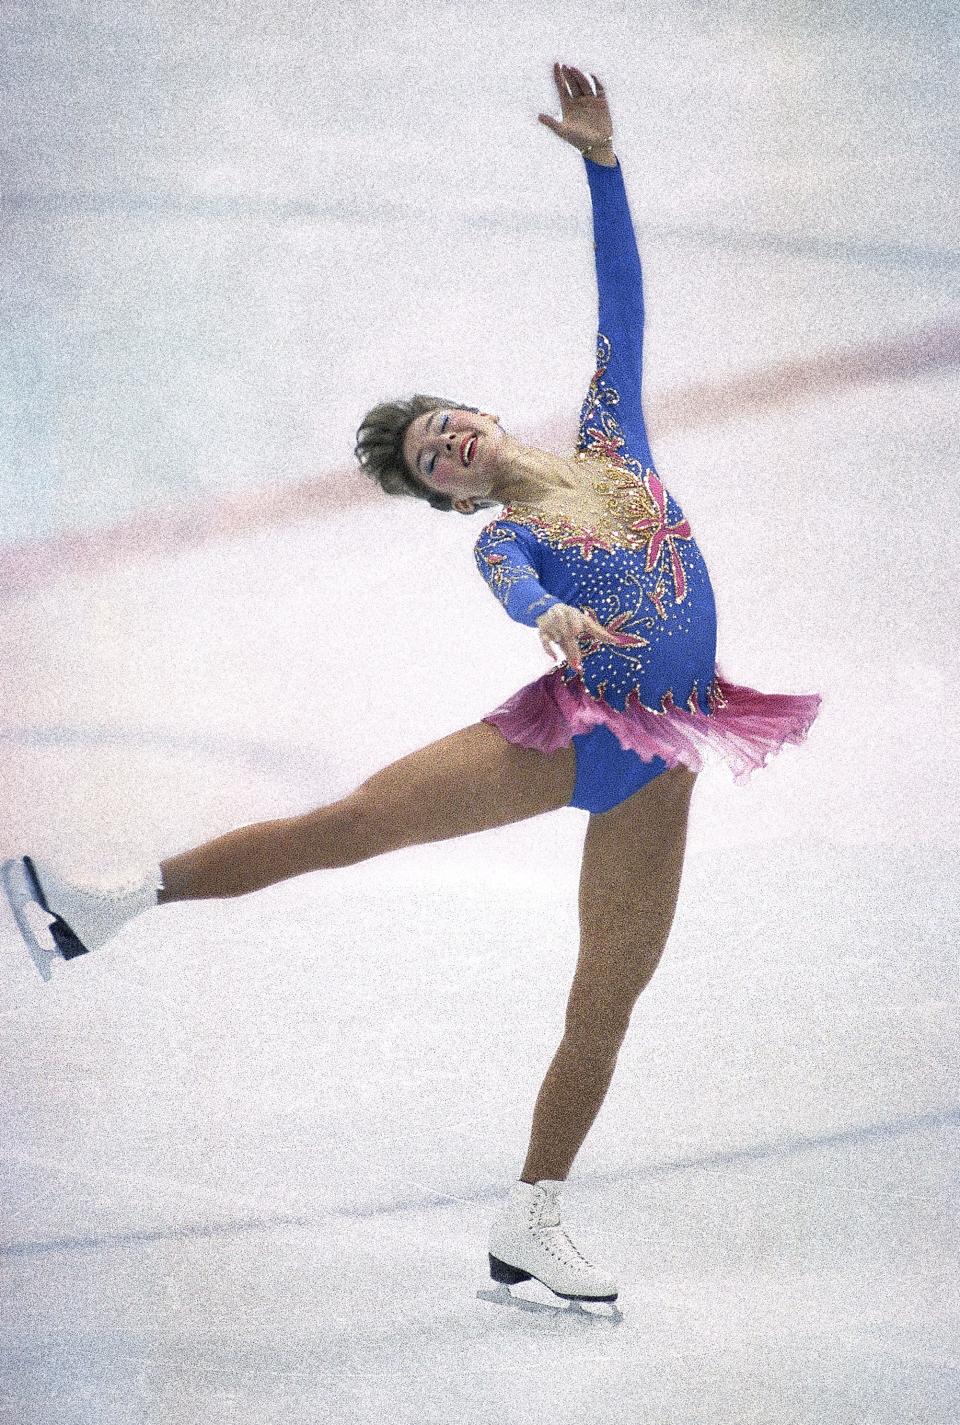 Caryn Kadavy twirls on the ice during a short program presentation in the Olympic women's figure skating, Feb. 25, 1988, in Calgary, Canada. Kadavy finished fifth in this event. The first Erie native to take part in a Winter Olympics, in Calgary, she was in sixth place overall after the performance shown here, but withdrew from competition with the flu.